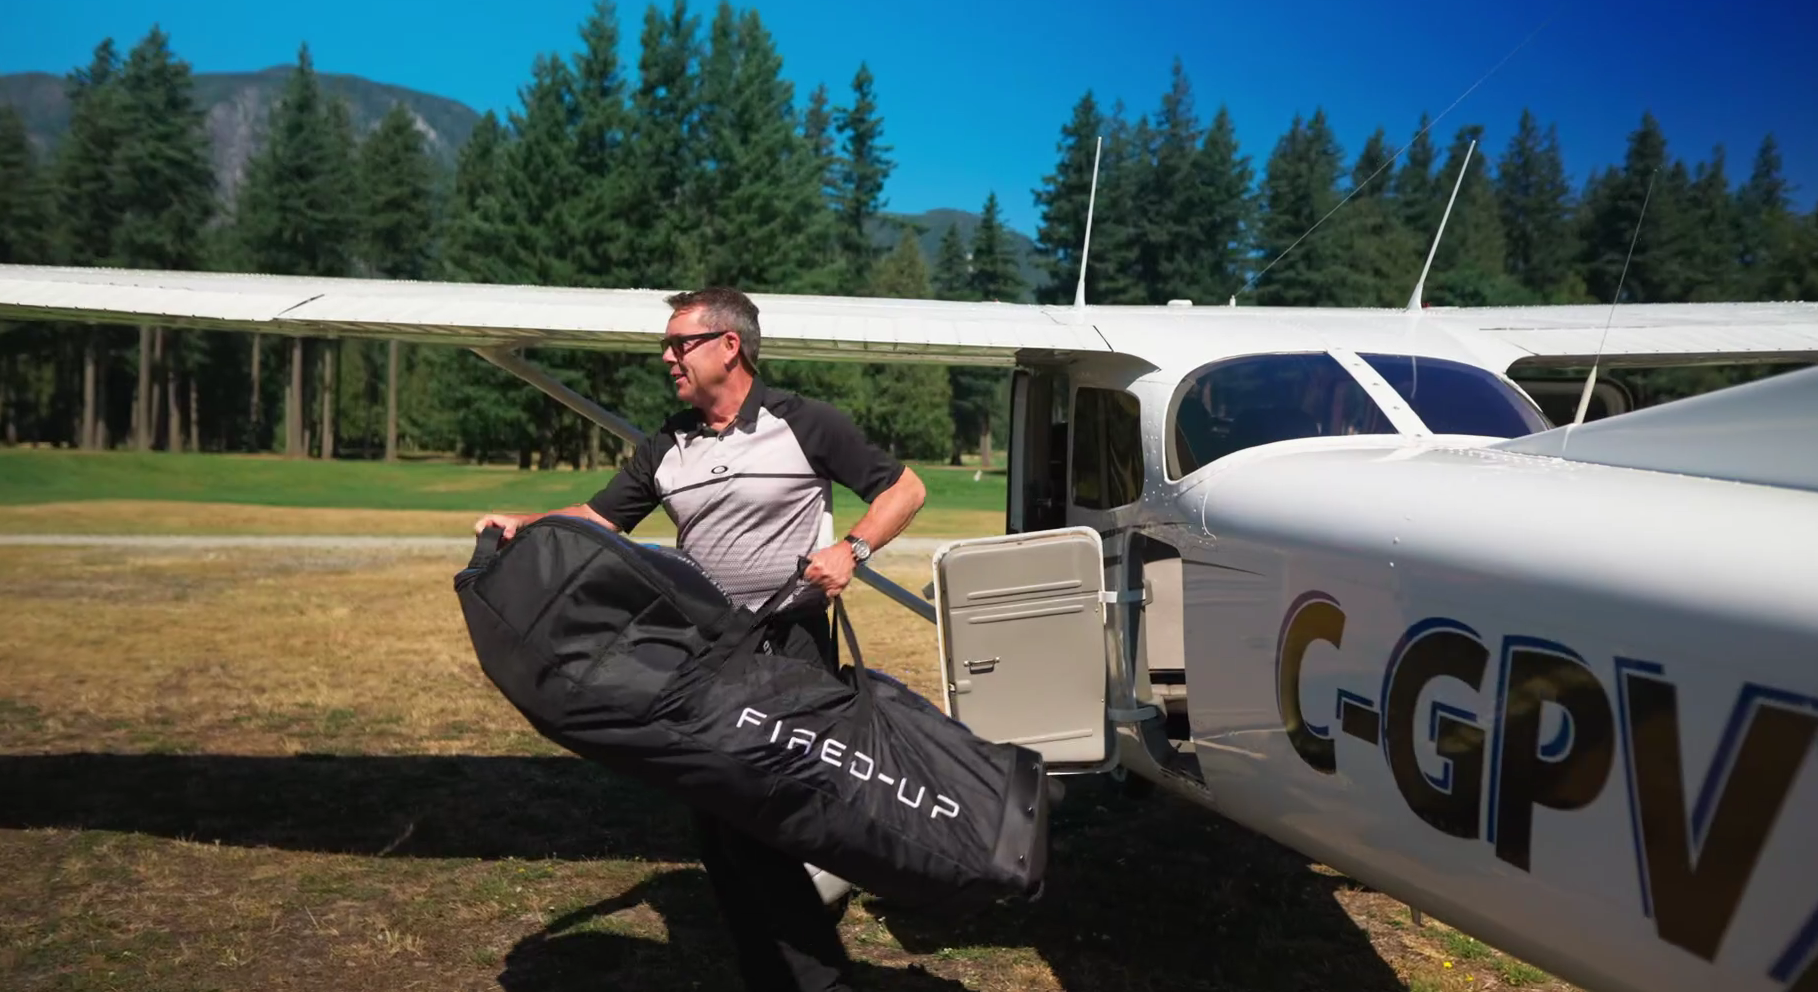 Unloading a golf bag from a small private plane